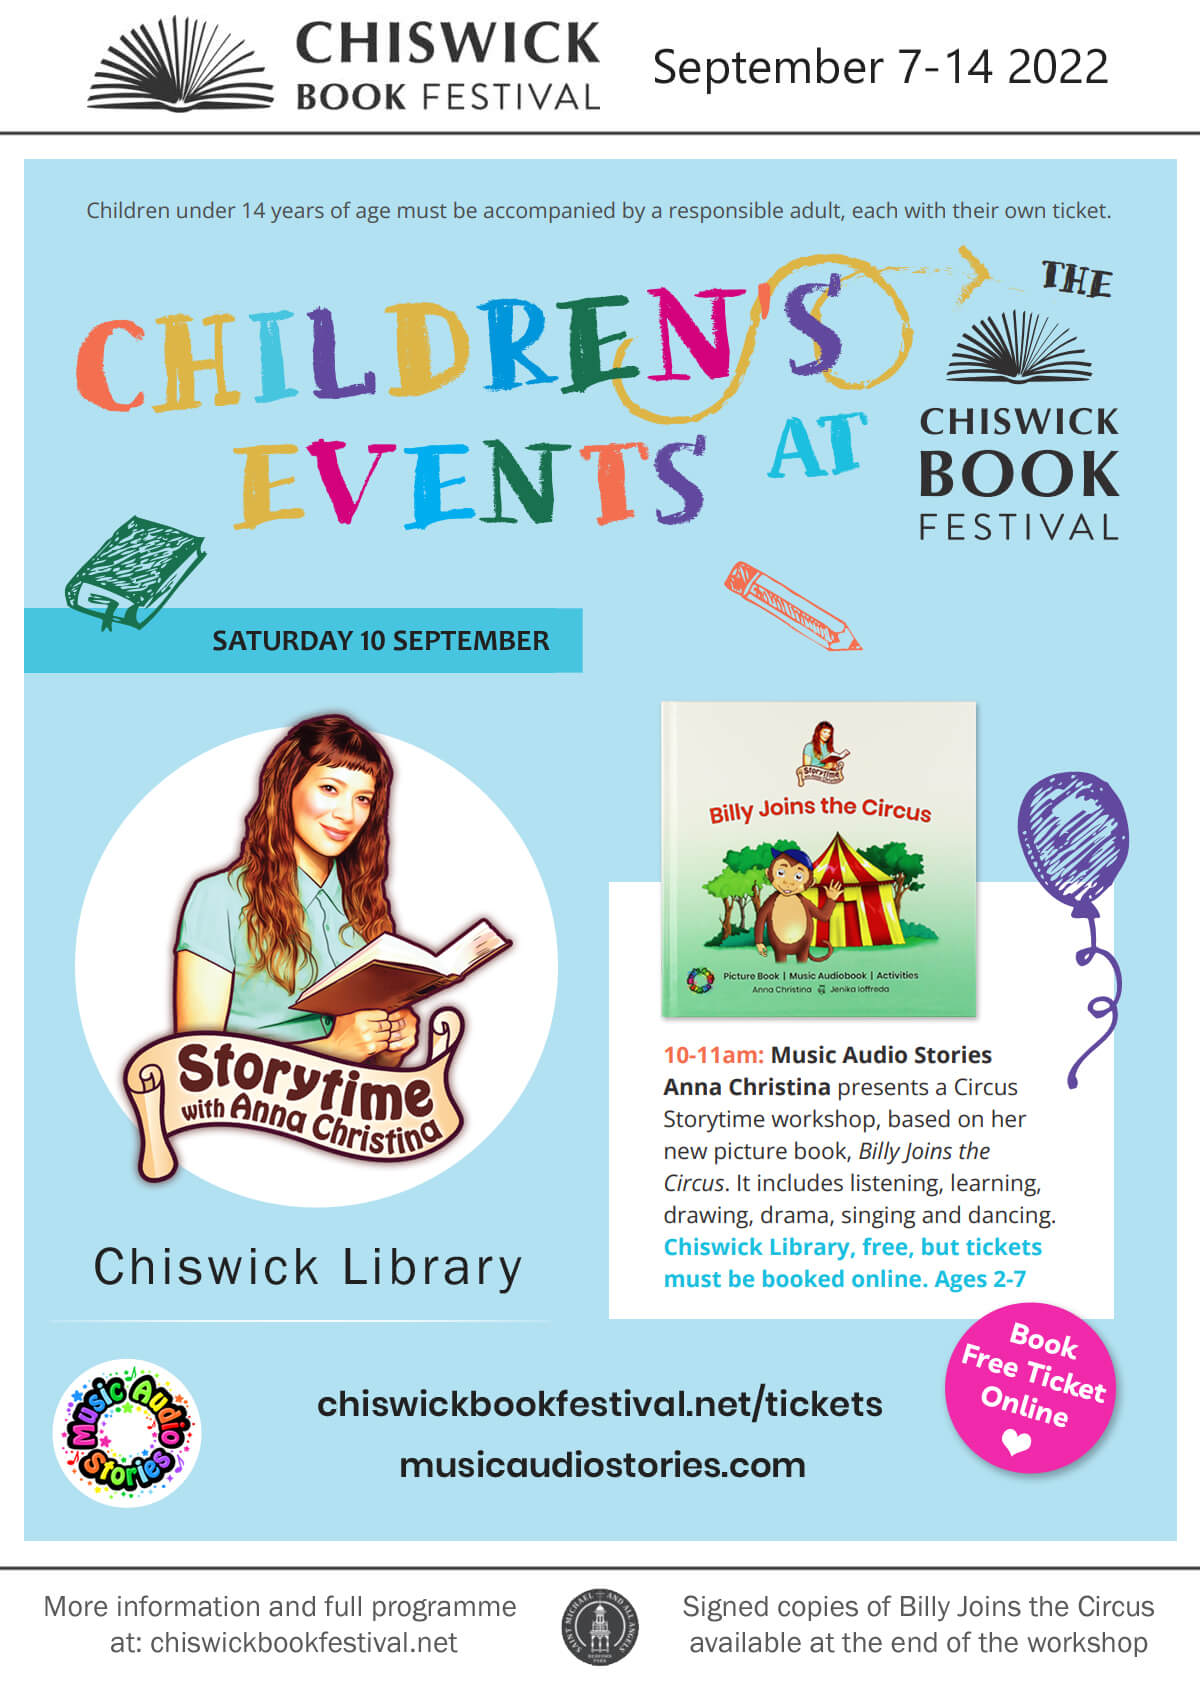 Billy Joins the Circus - Storytime and Book Signing with Anna Christina from Music Audio Stories at Chiswick Book Festival